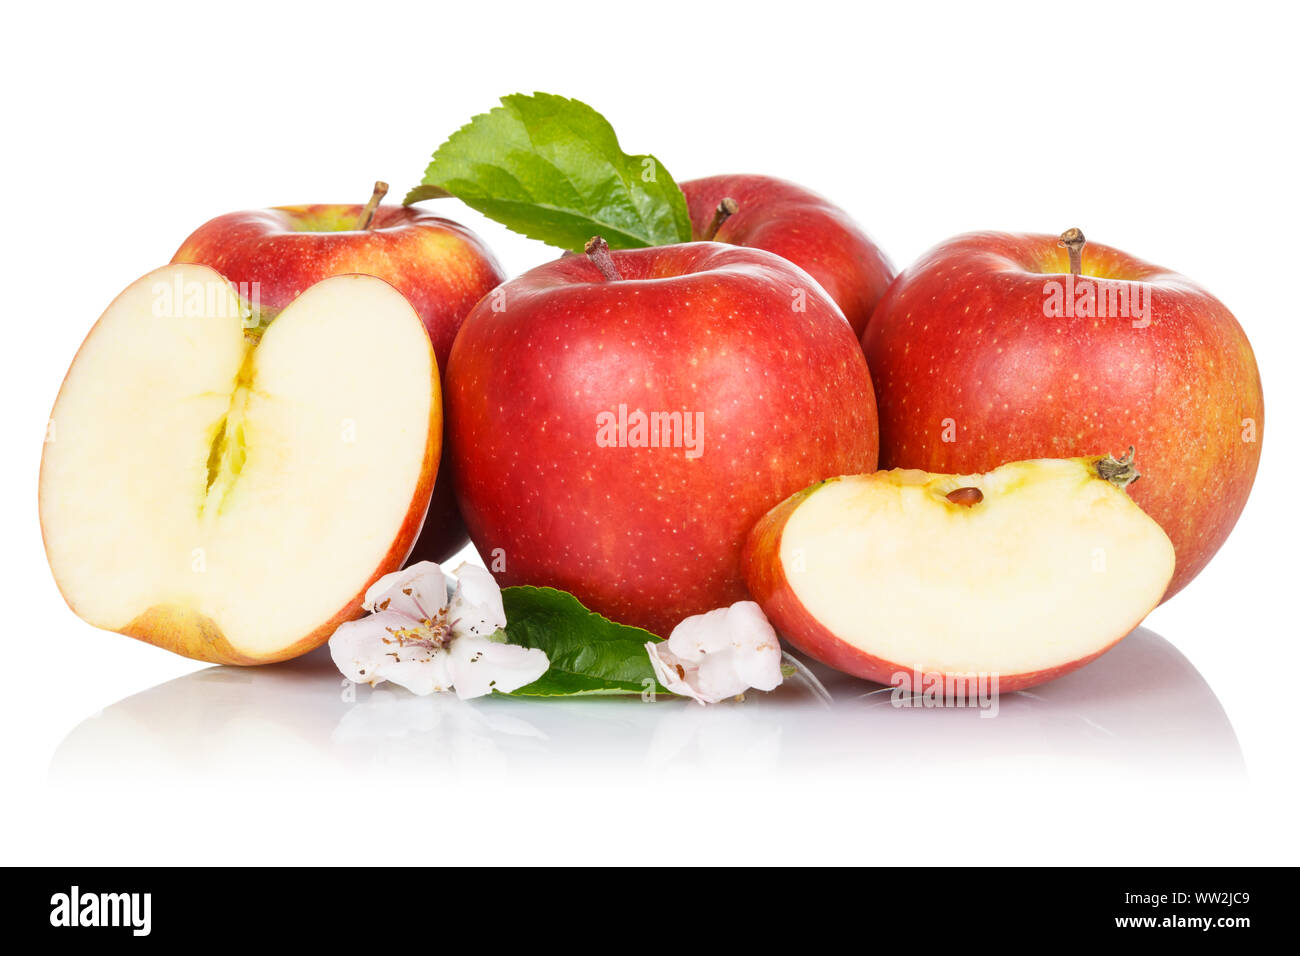 Apples apple fruits fresh fruit red blossoms isolated on a white background Stock Photo